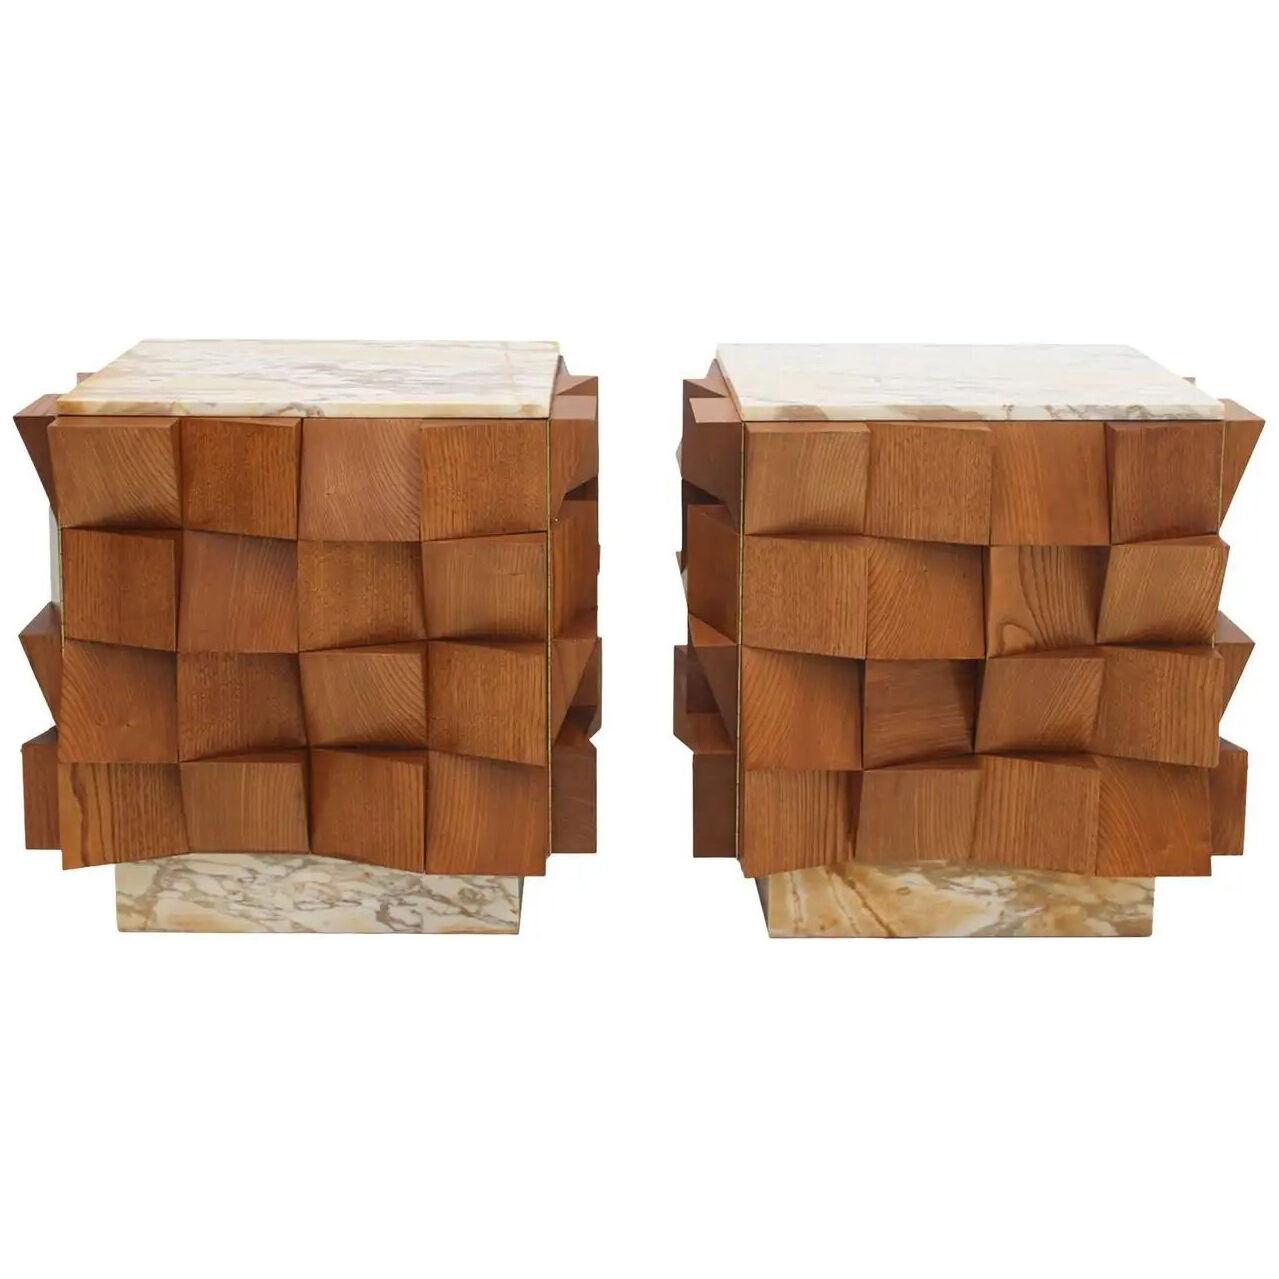 L.A. Studio Pair of Birch Wood and Siena Marble Stone Italian Side/Night Tables